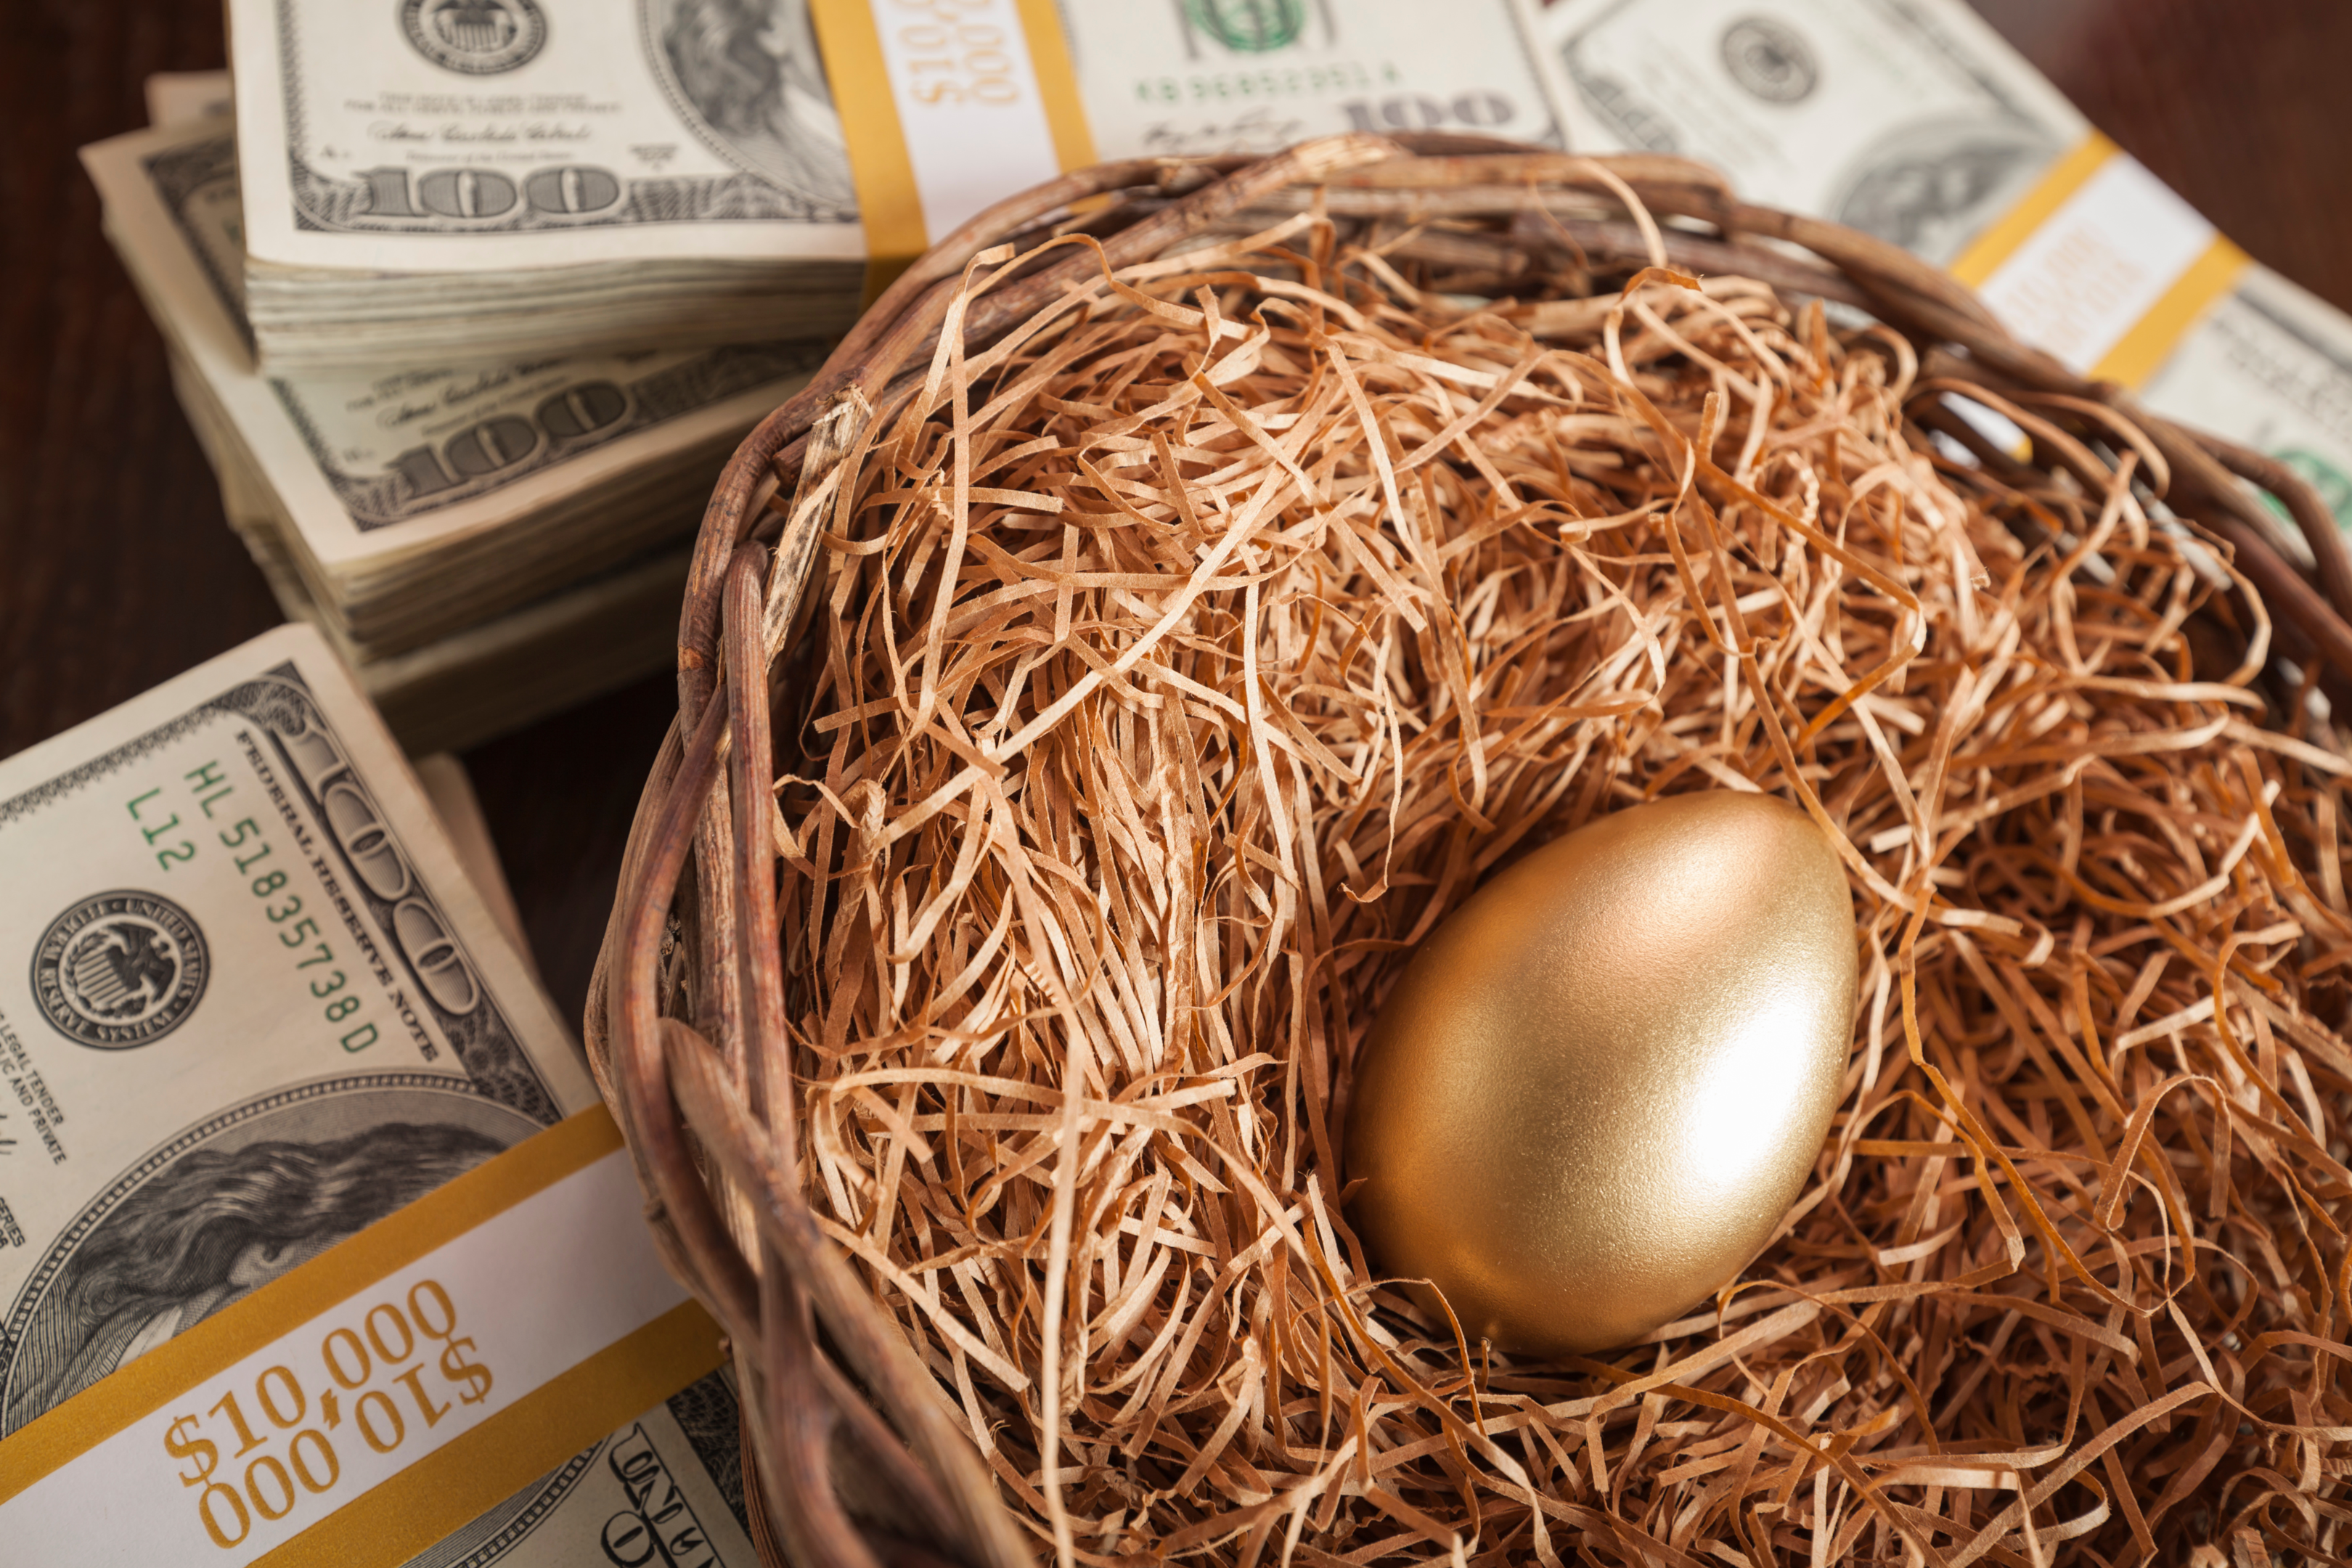 keogh plan money and golden egg in a nest